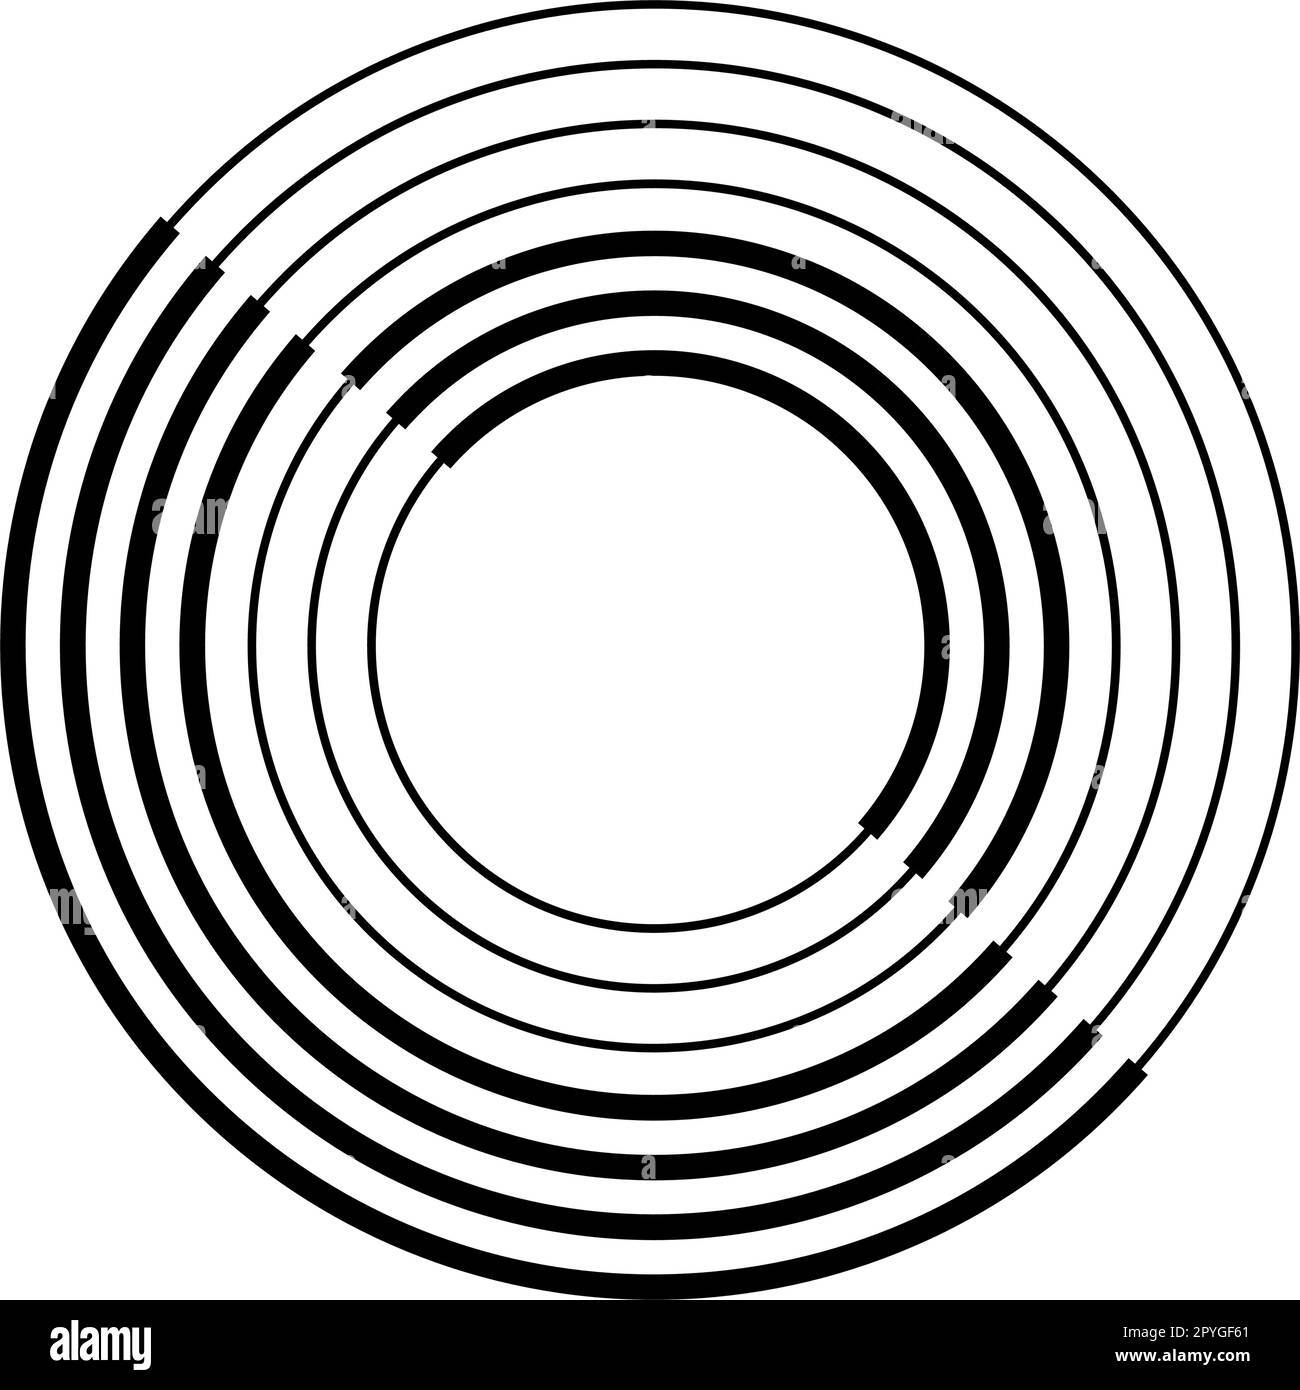 Concentric repeating circles icon. Assymmetric ring shapes. Radio, radar or sonar wave symbol isolated on white background. Vector graphic Stock Vector